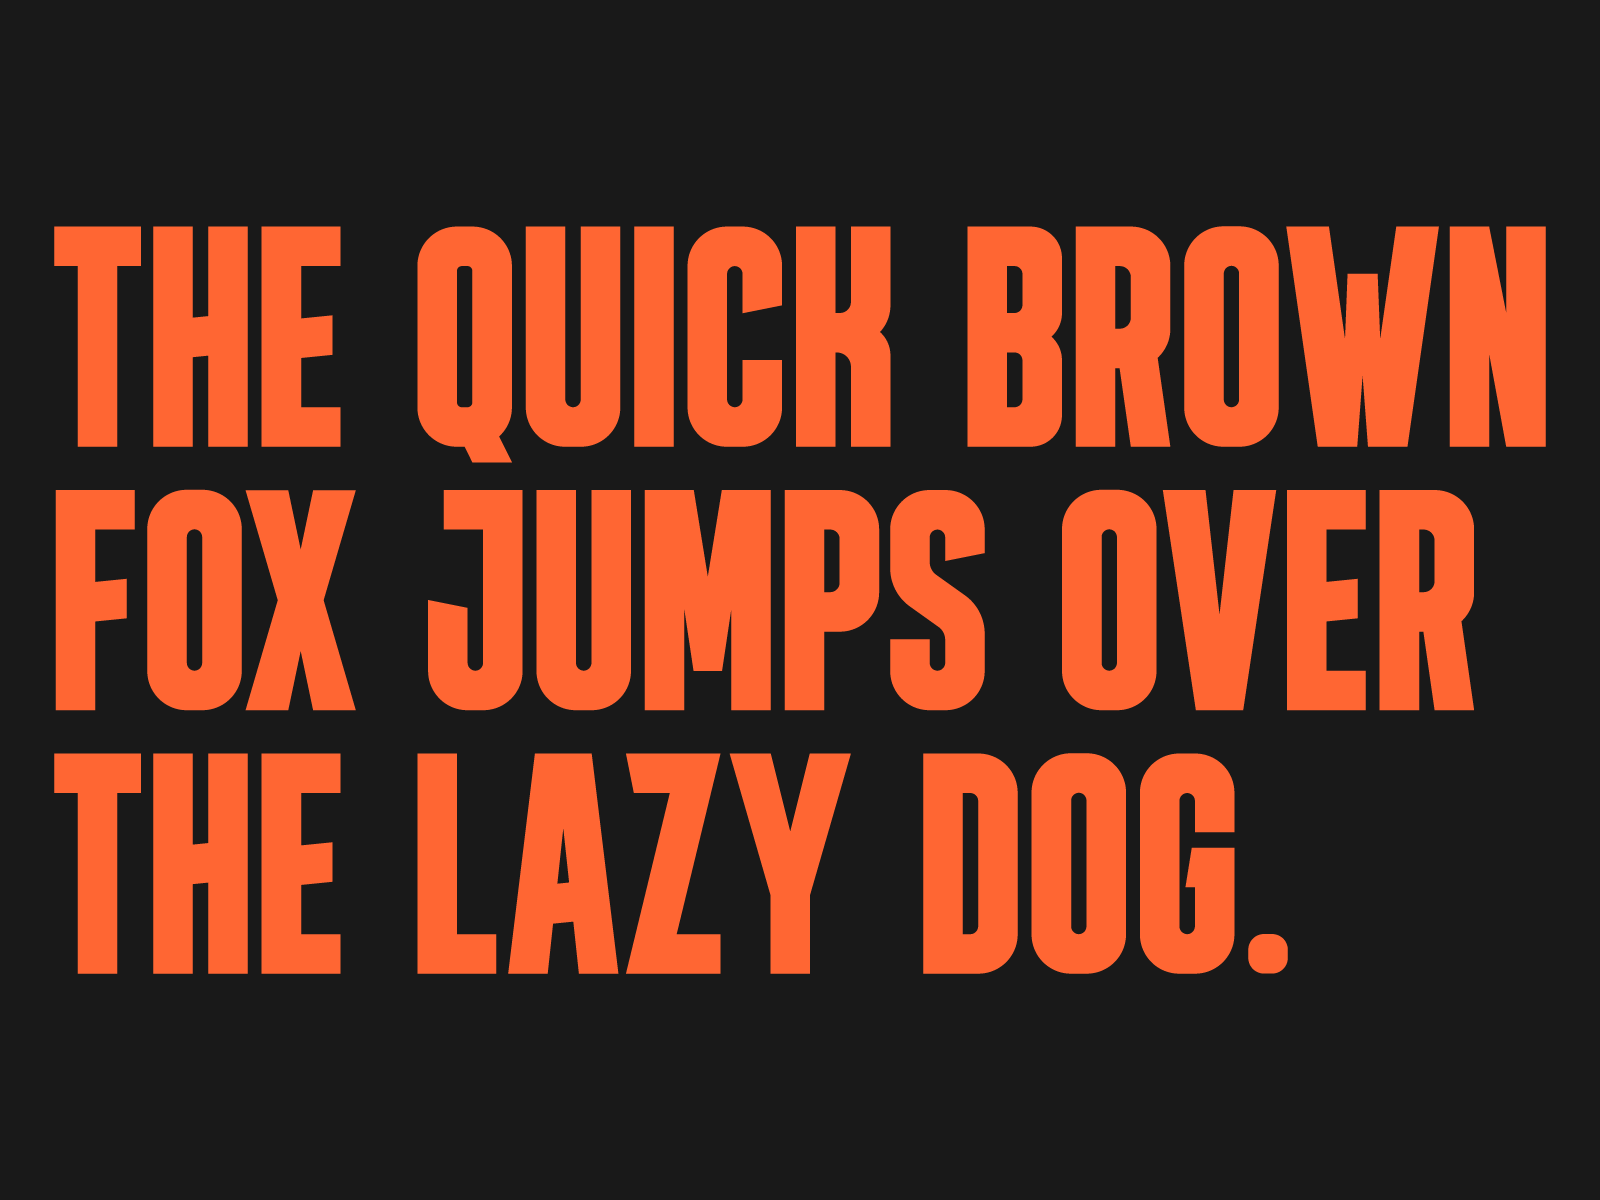 din condensed font free bold